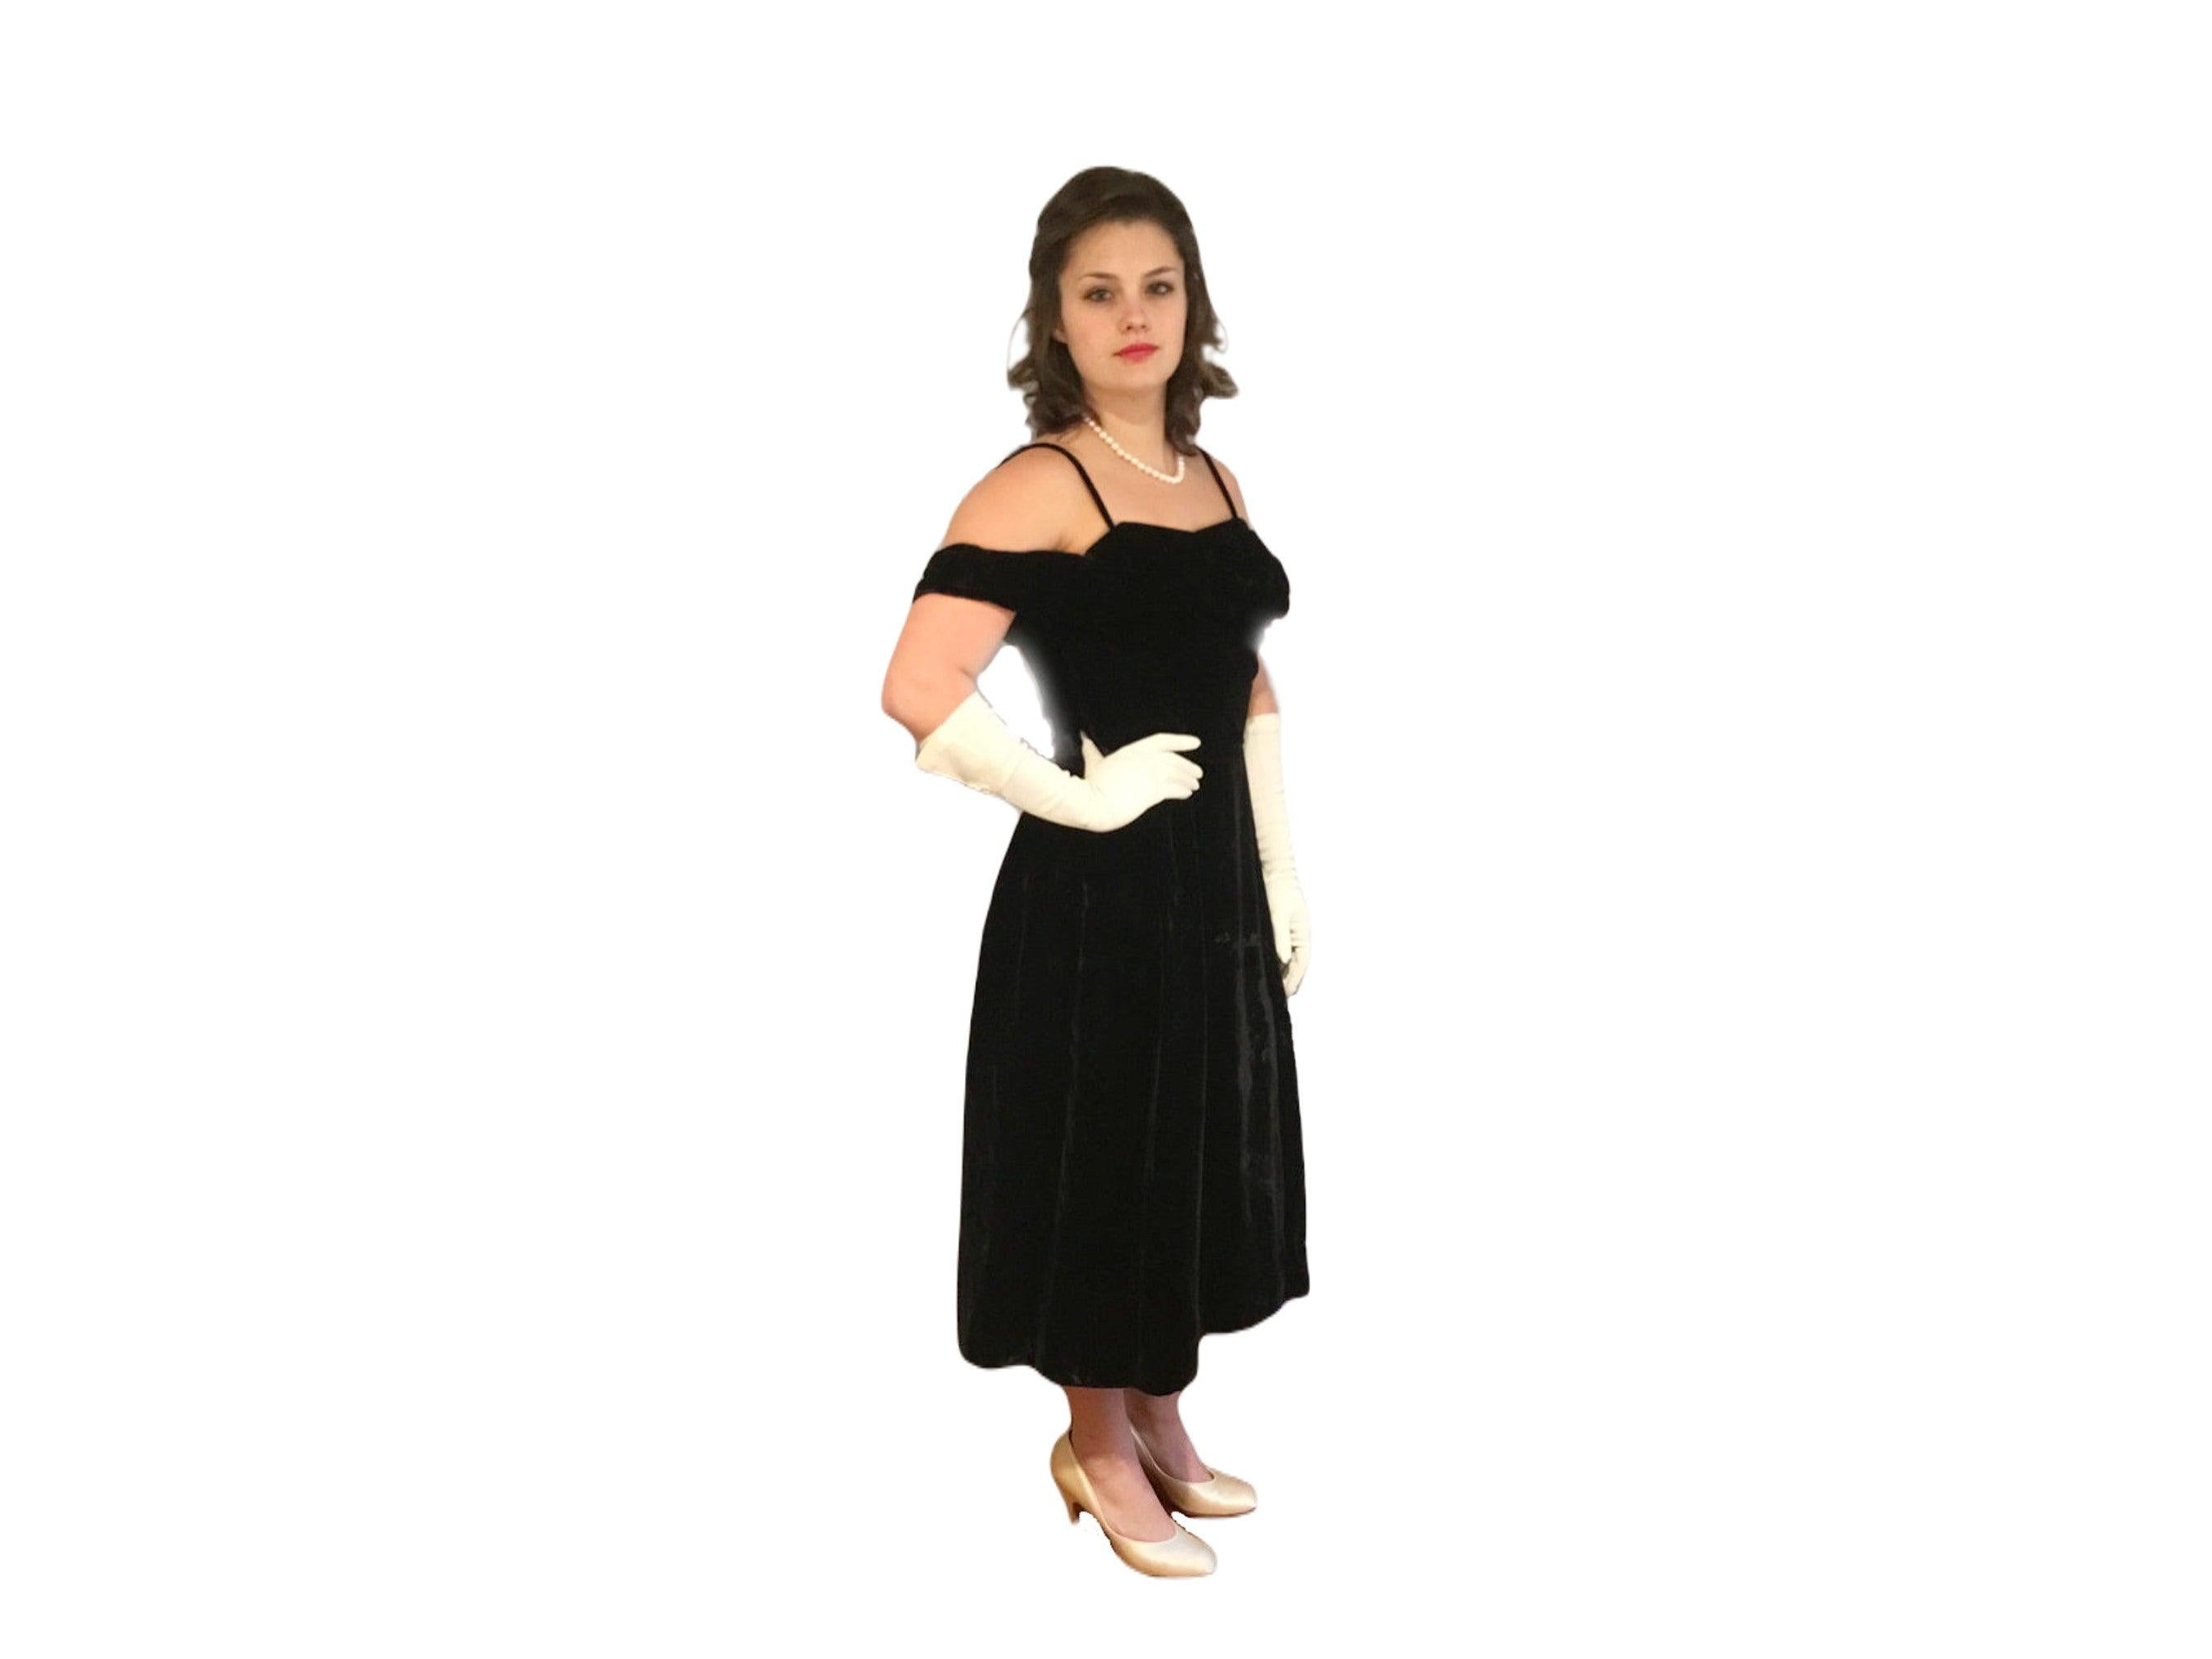 Simply gorgeous 1950's Ceil Chapman black velvet off-the-shoulder gown! Ceil Chapman was one of Marilyn Monroe's favorite designers (last image depicts Marilyn dressed in an off-shoulder black Ceil Chapman in a 1950 photo), known for her exquisite